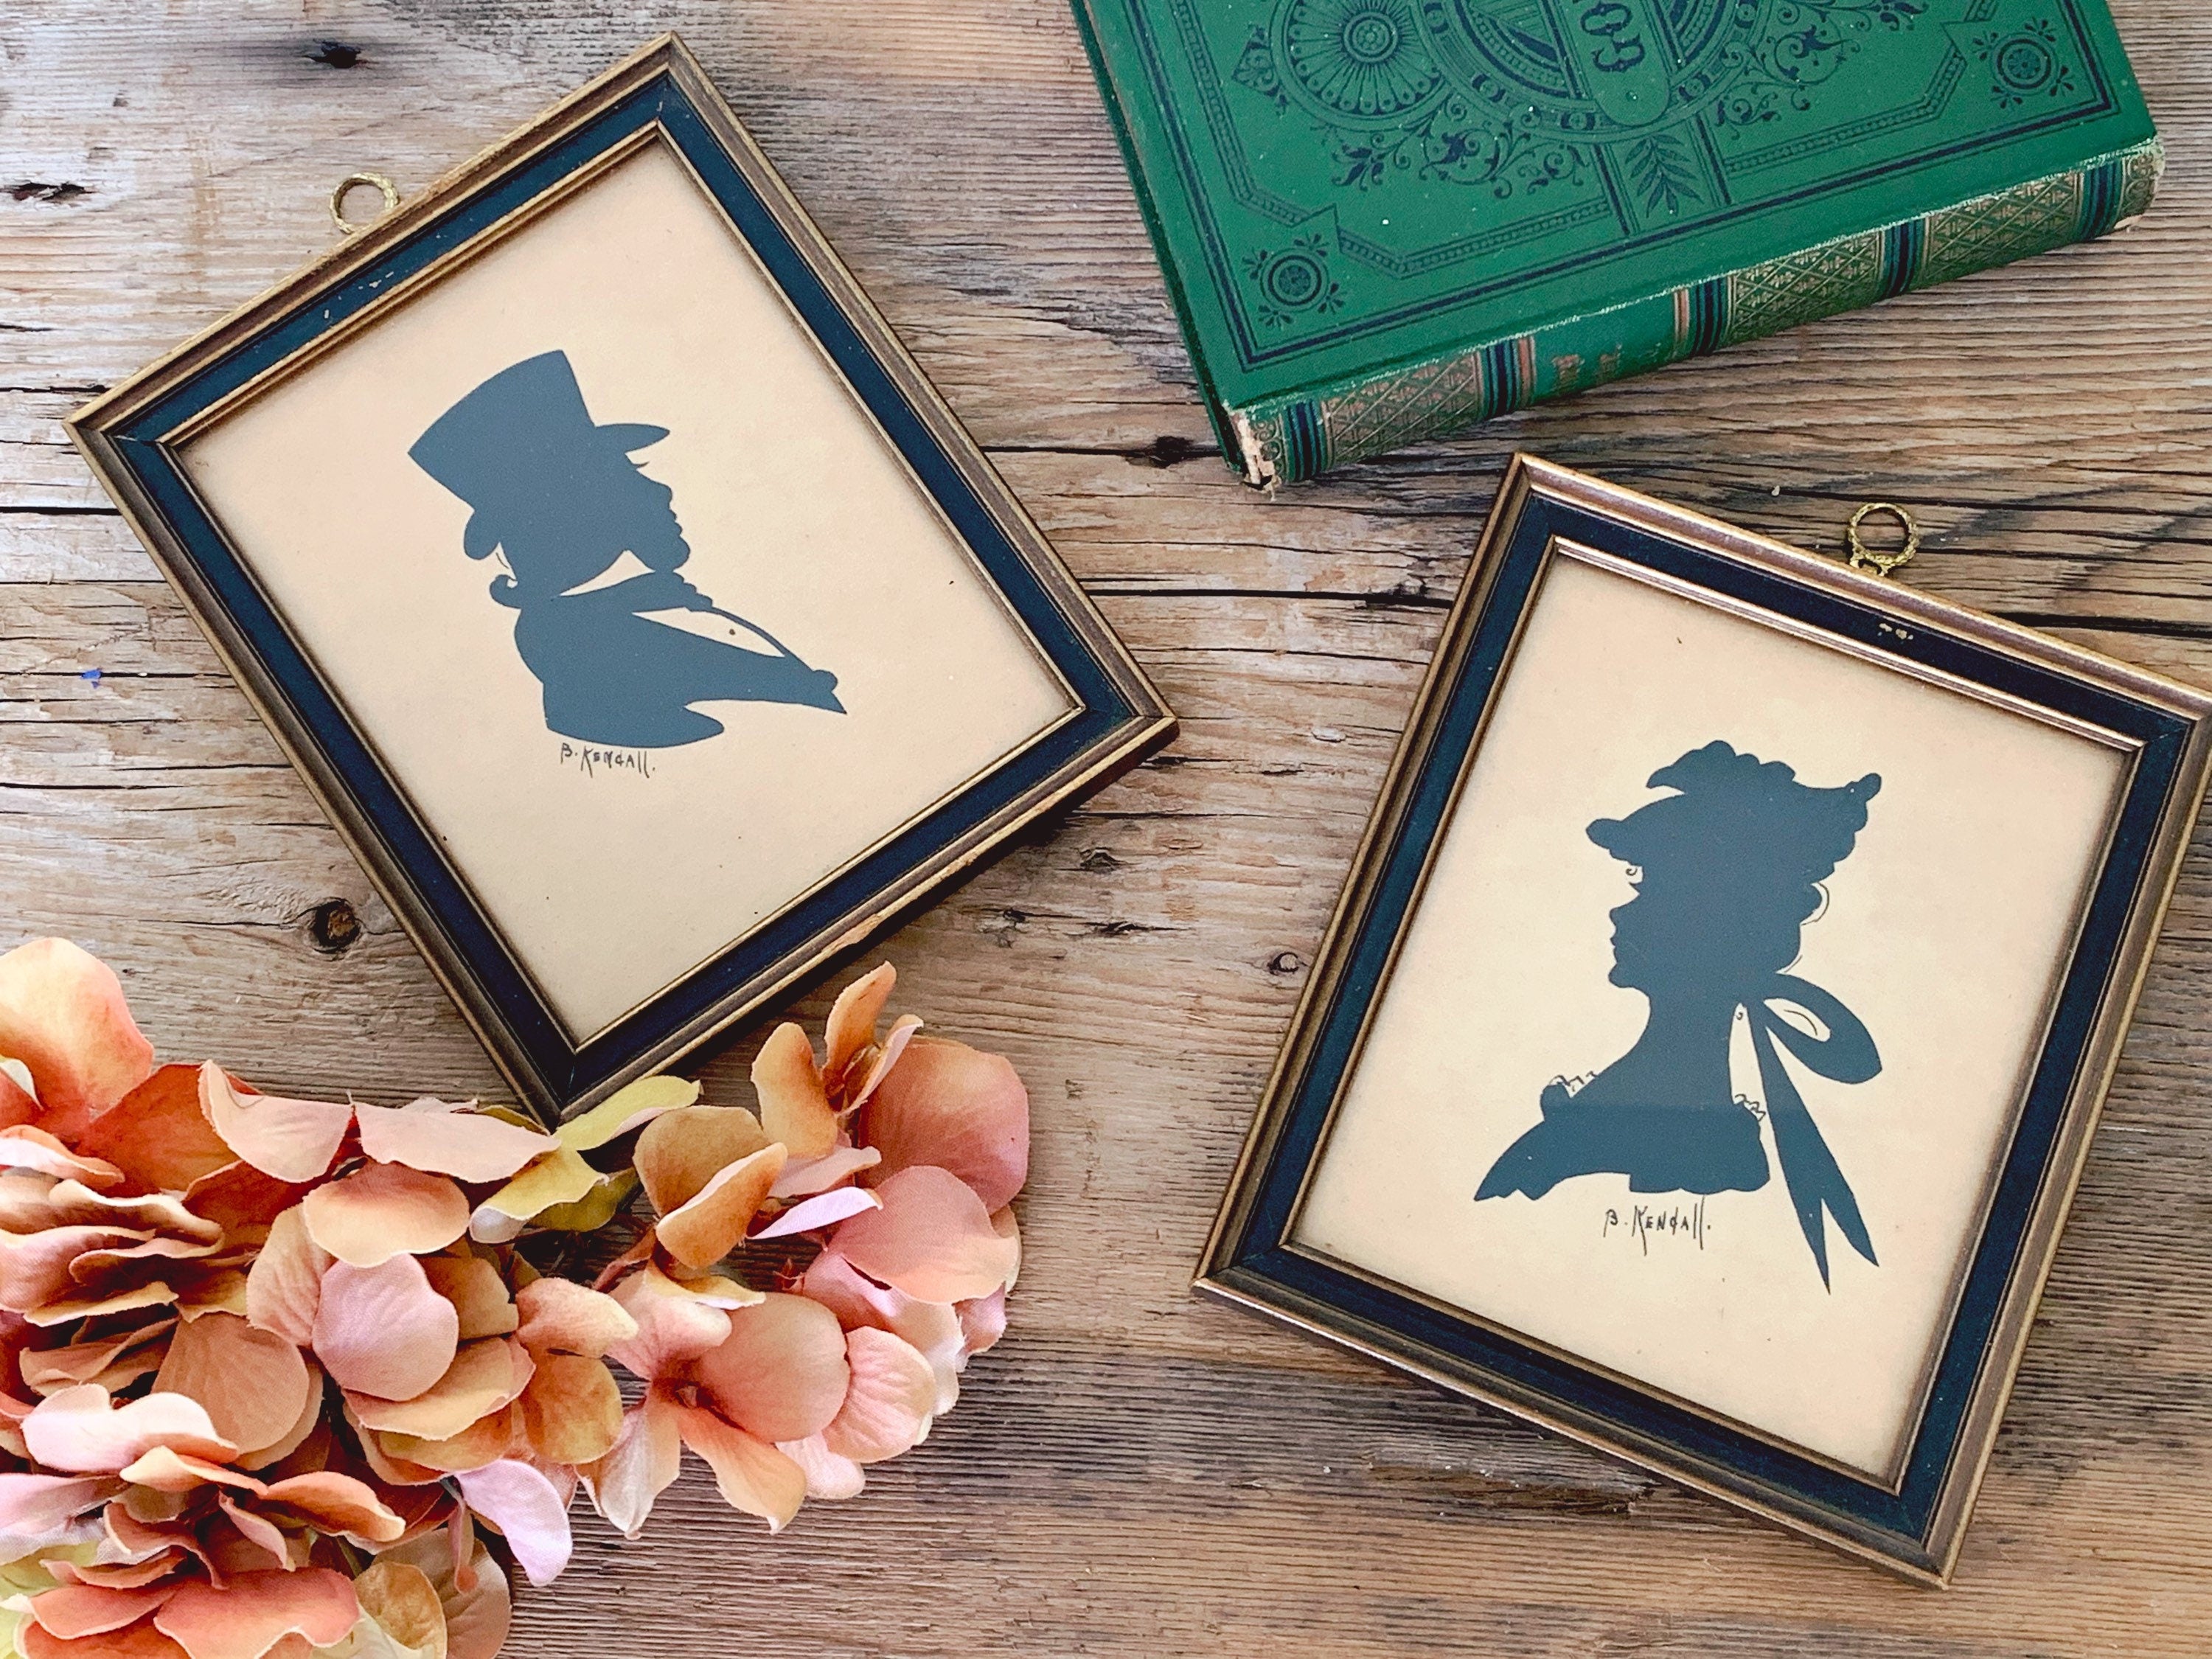 Pair of Antique 1800s Hand Cut Silhouettes of A Lady and Gentleman in Old Wooden Frames | By Beatrice Kendall | Vintage Wall Decor